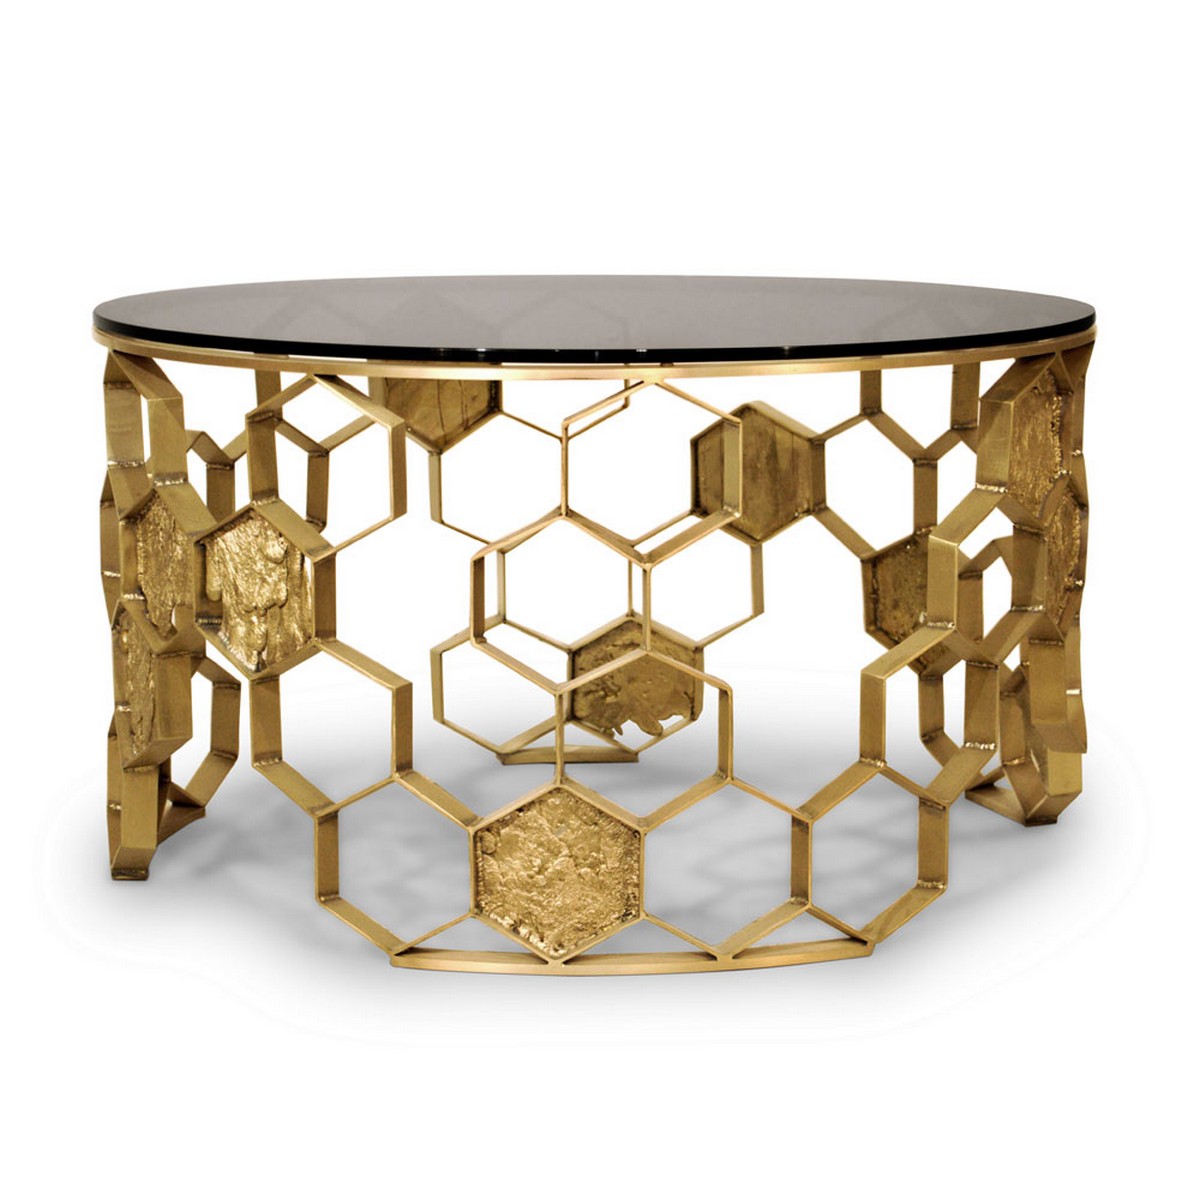 Luxurious Center Tables at Covet House Douro